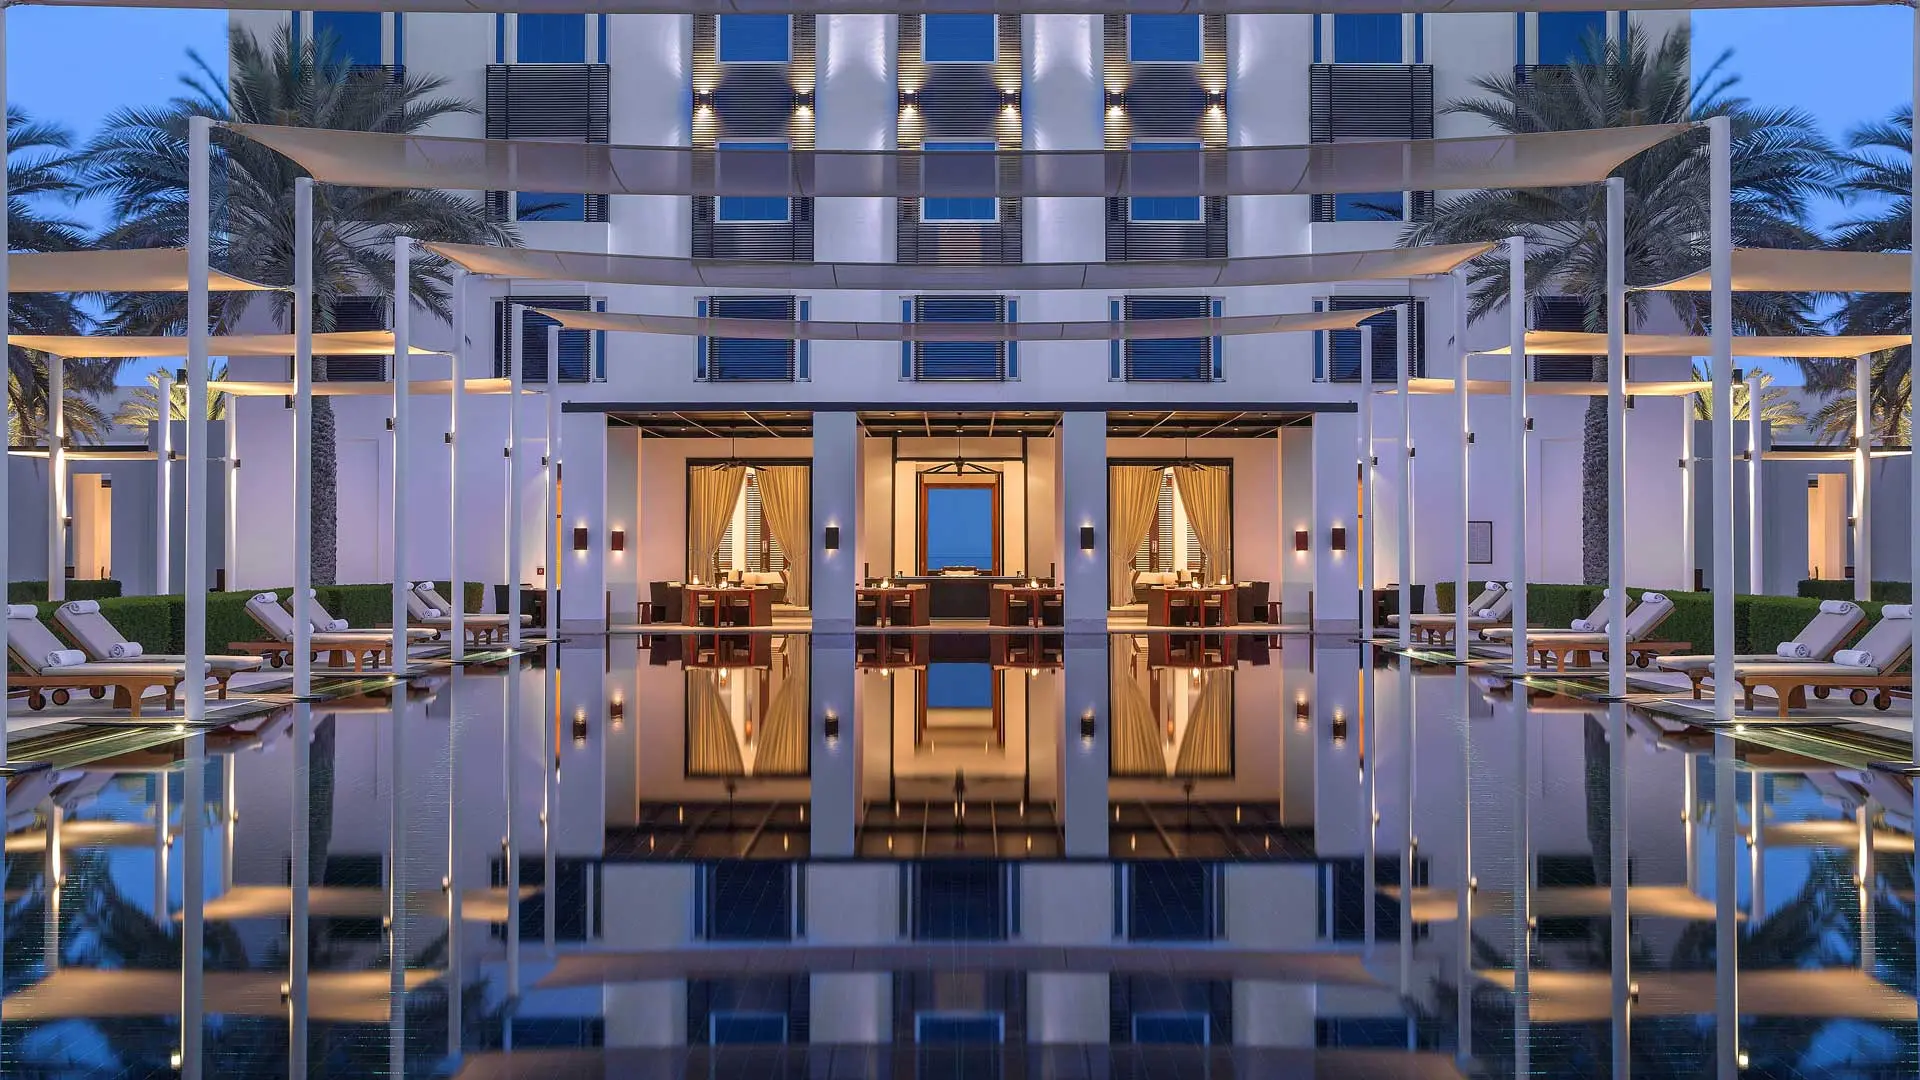 Hotel review Service & Facilities' - The Chedi Muscat - 1